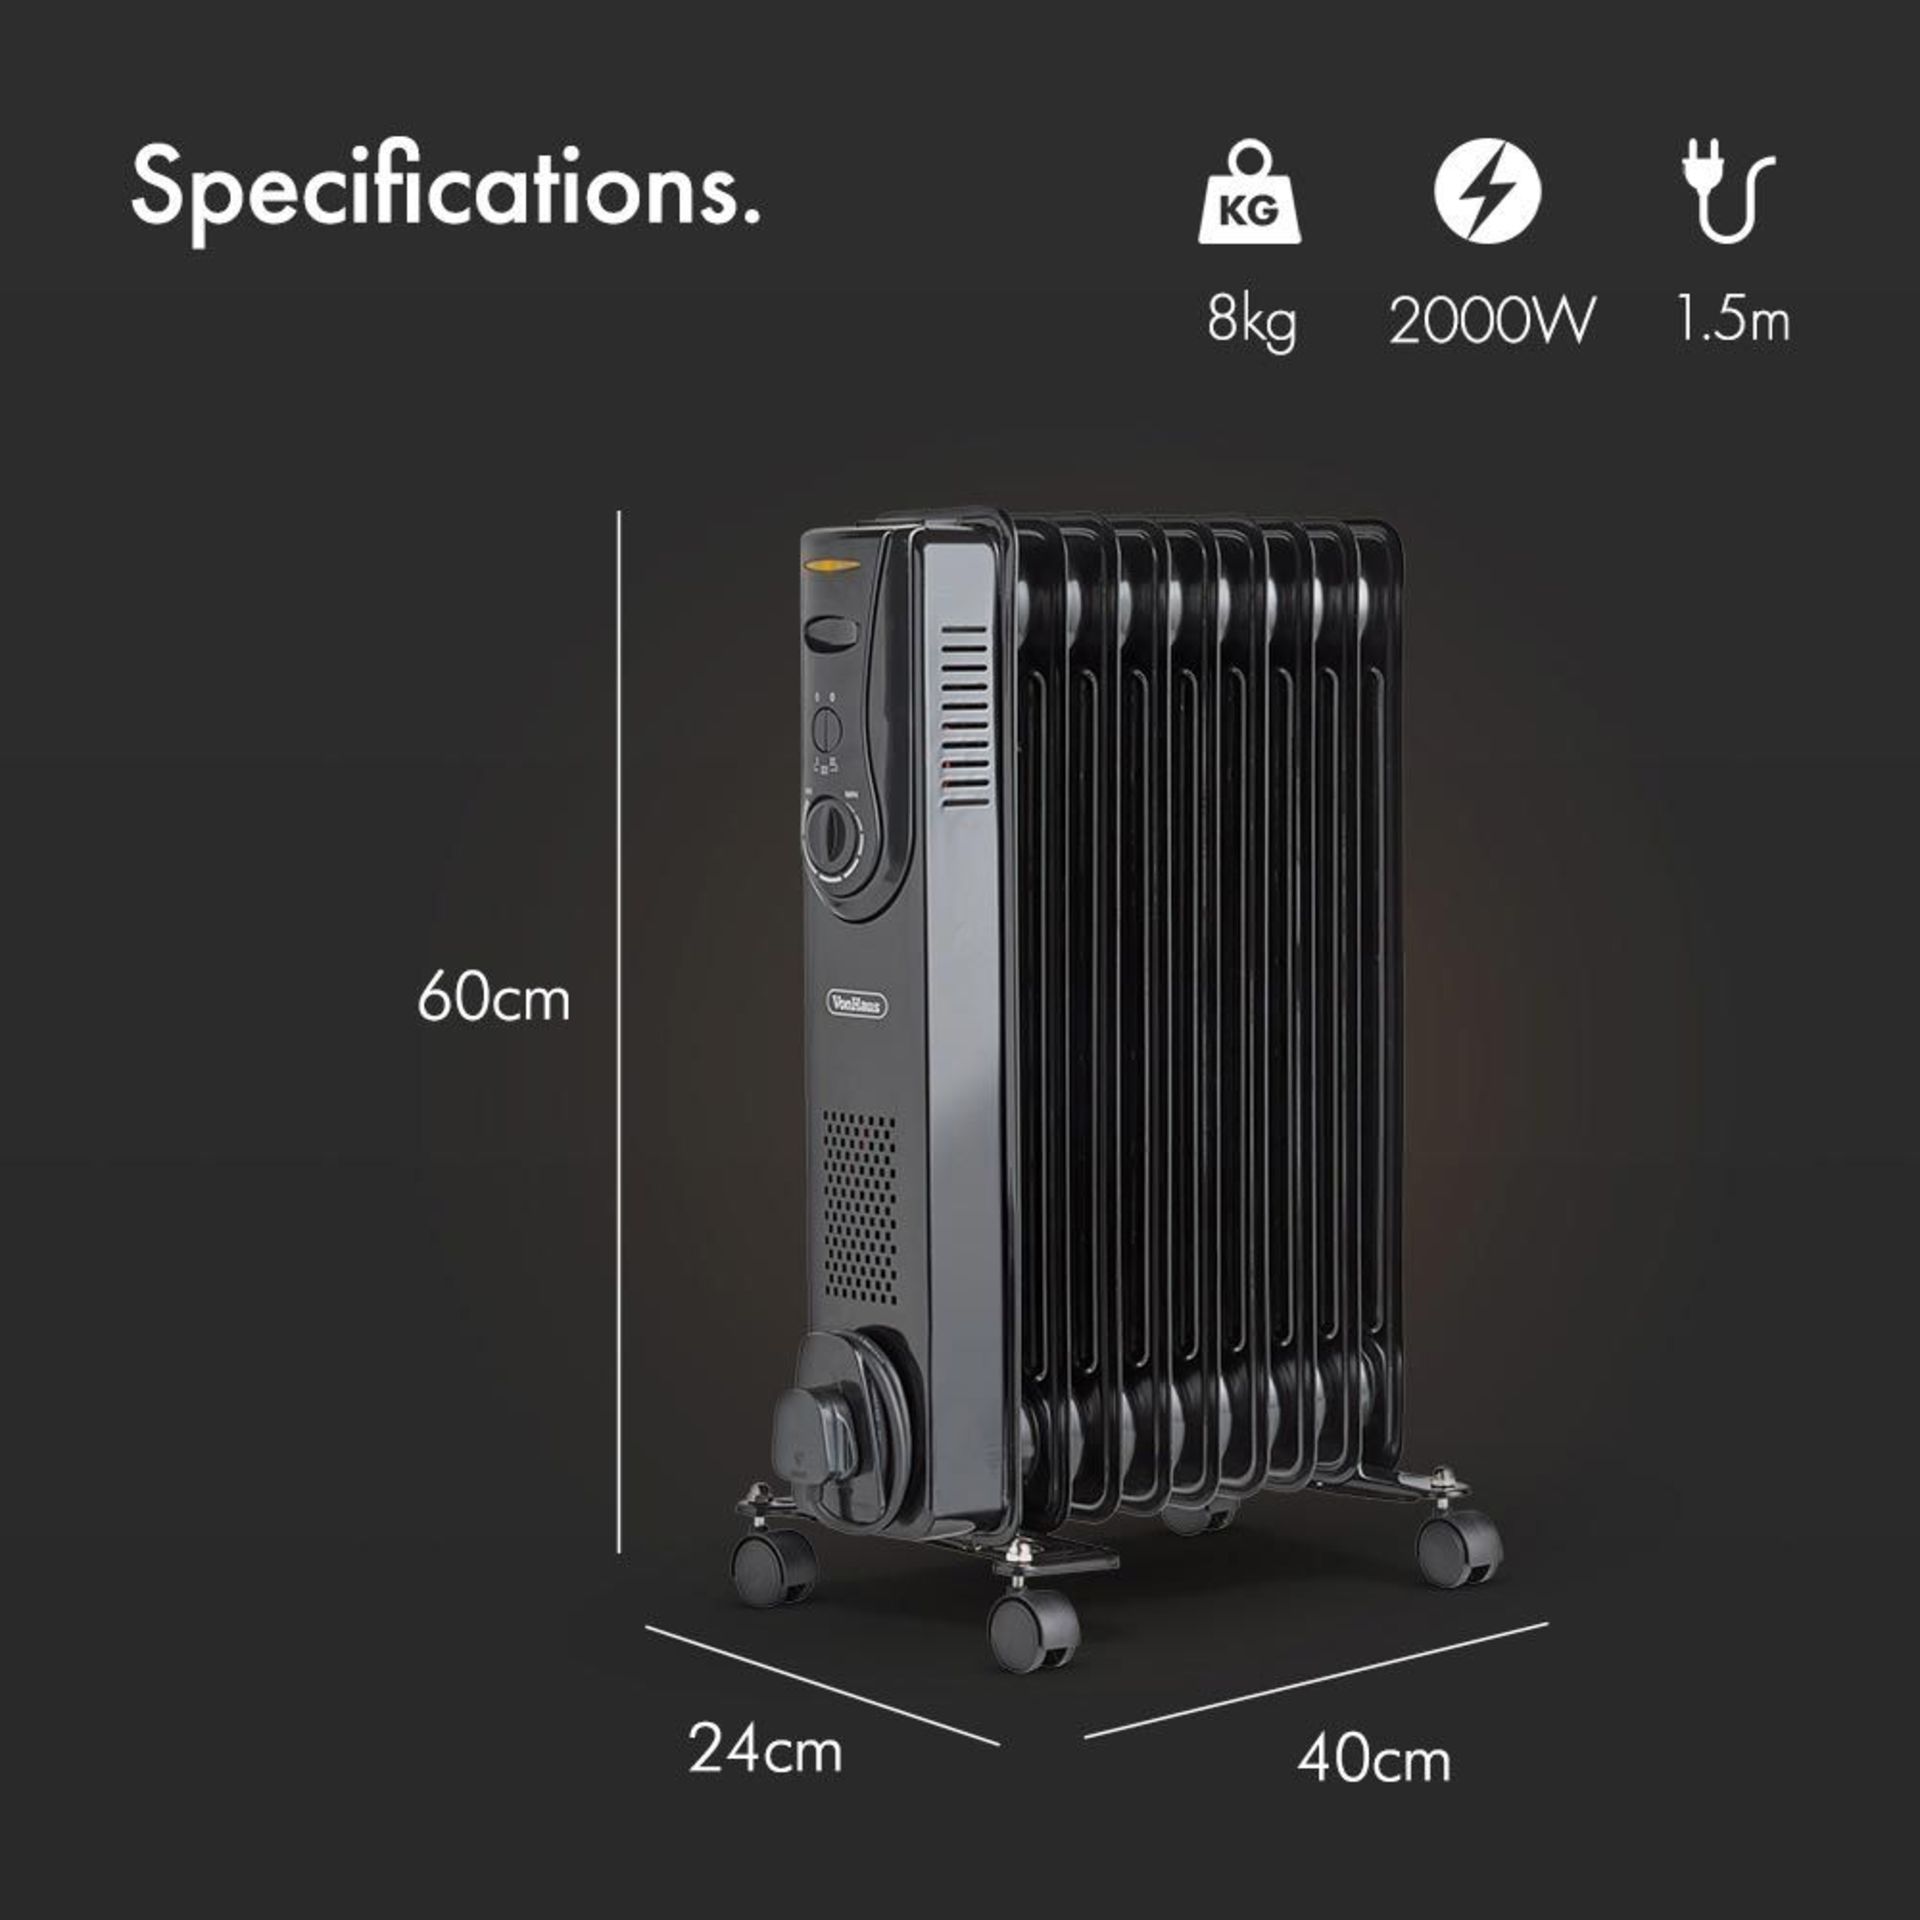 (CP114) 9 Fin 2000W Oil Filled Radiator - Black Powerful 2000W radiator with 9 oil-filled fins...